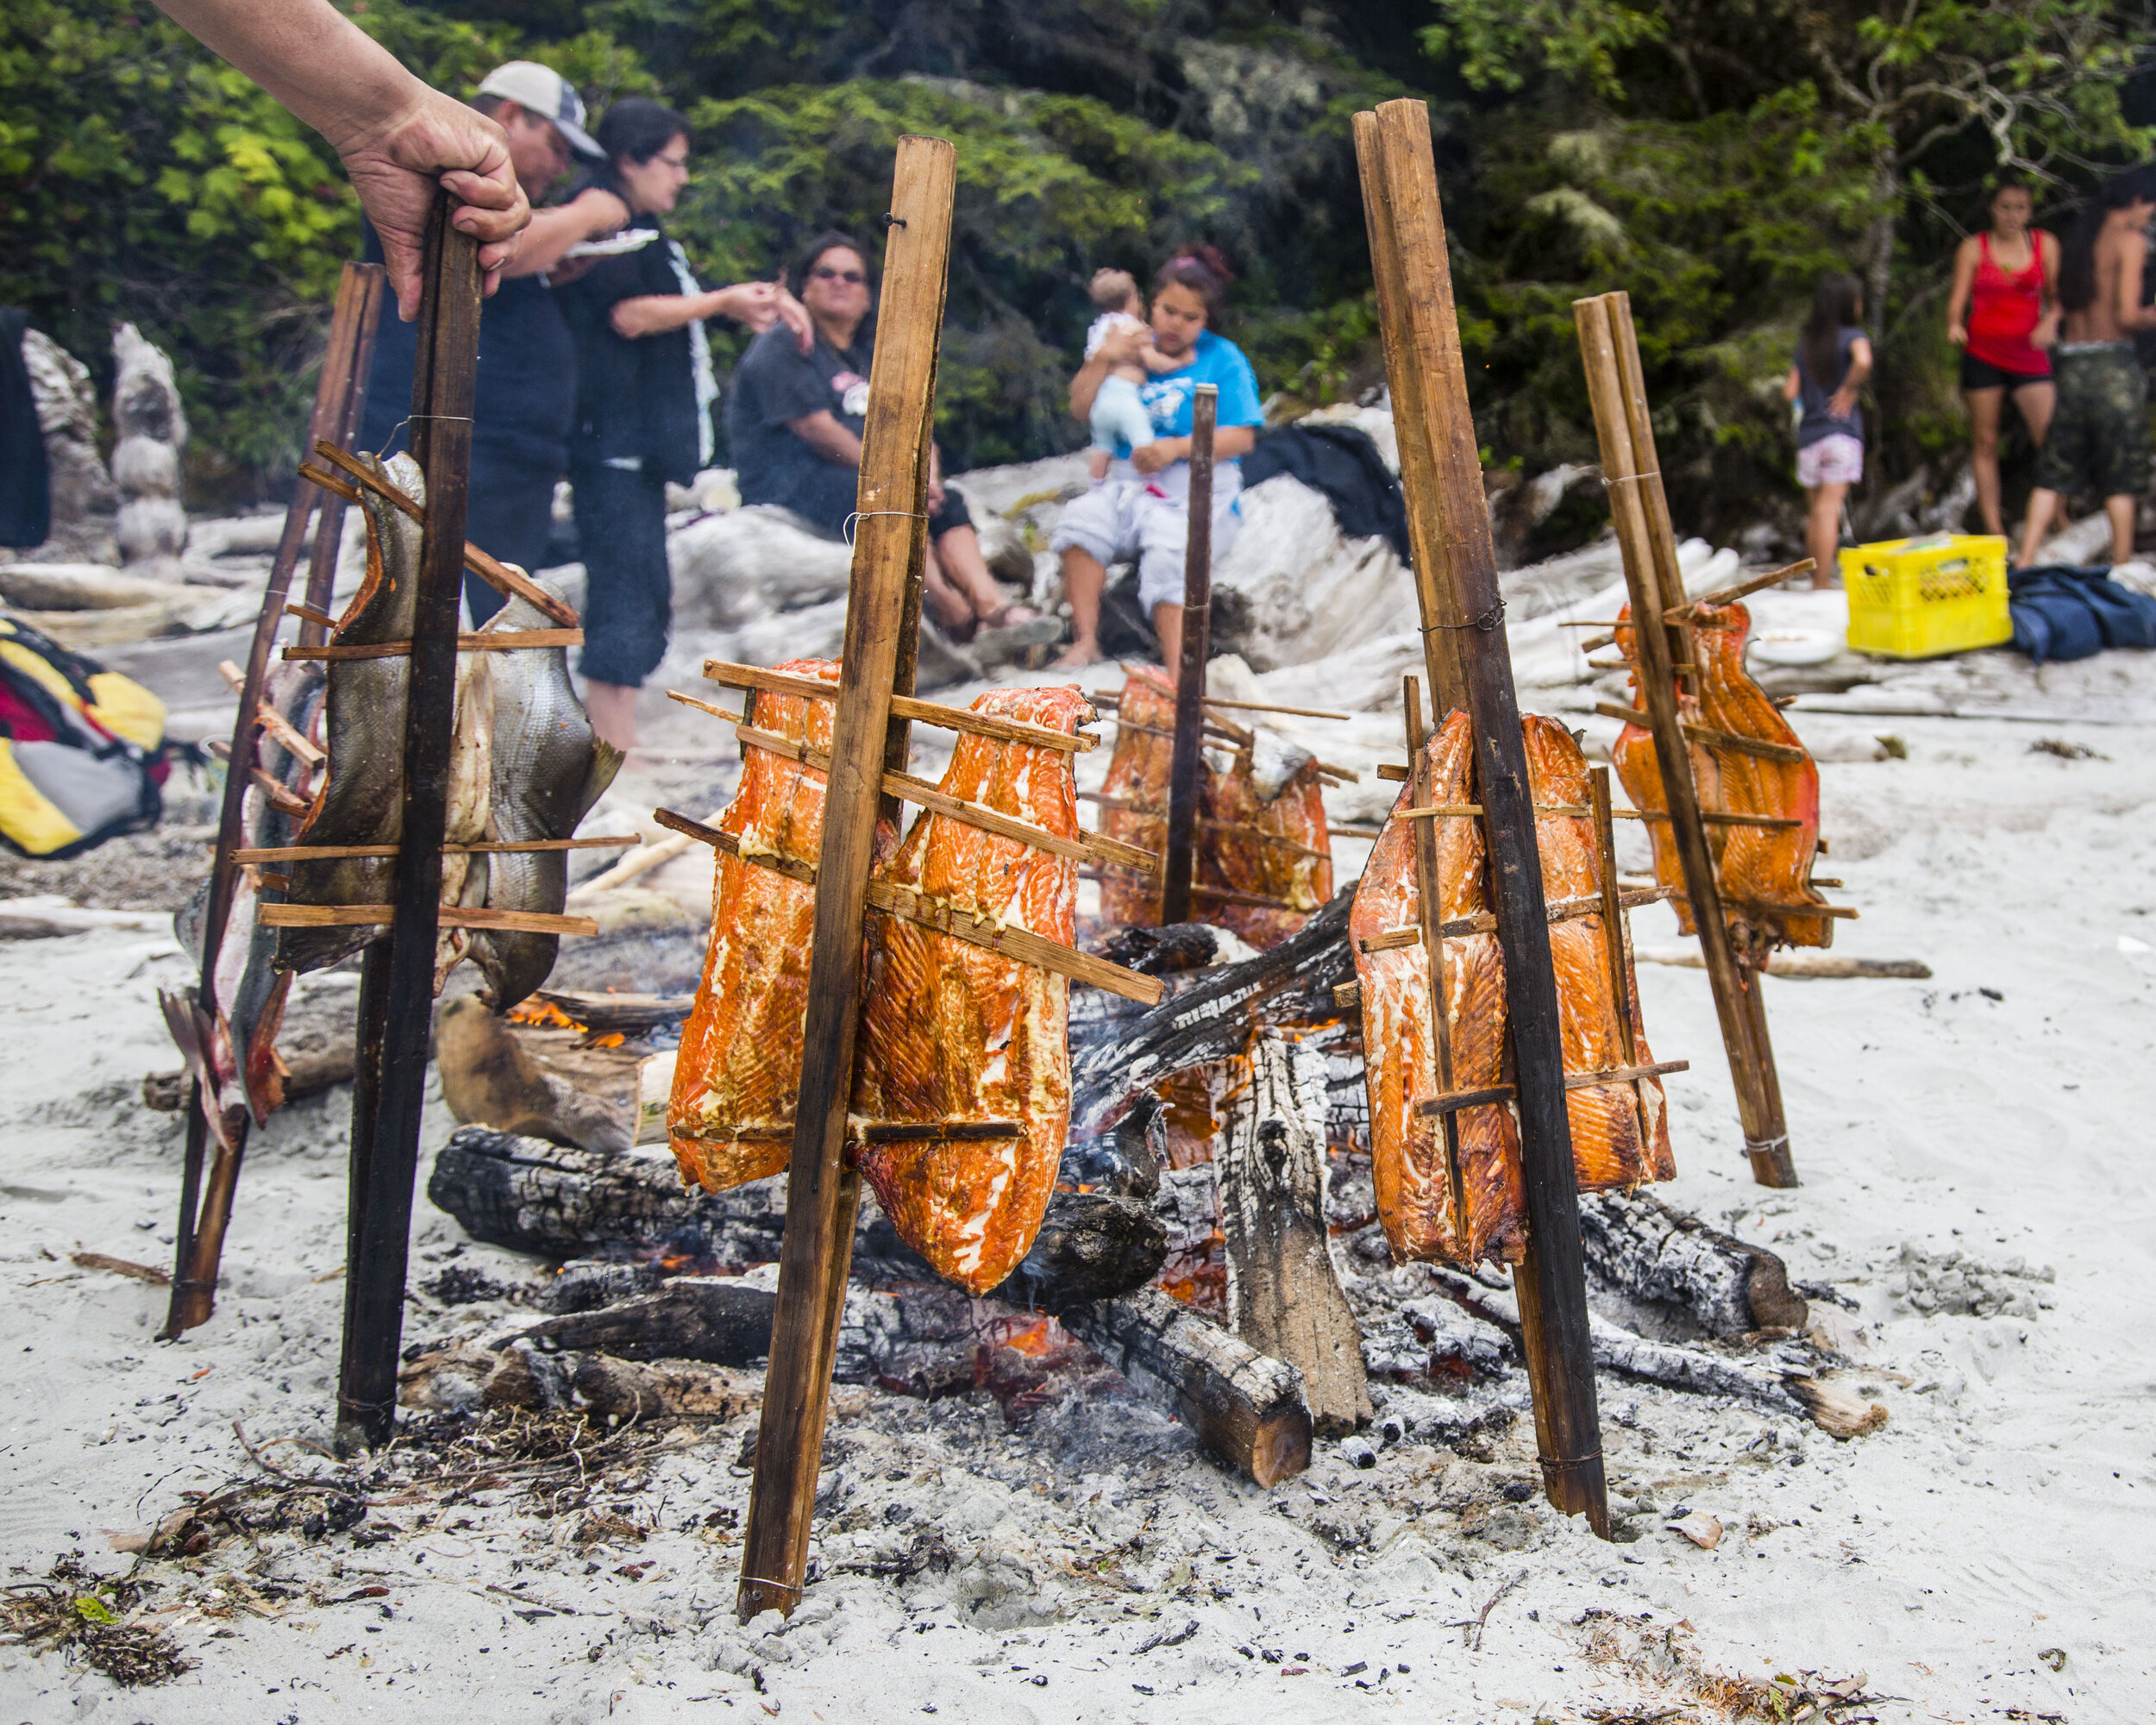  Fillets of wild salmon are cooked next to an open fire in the traditional manner using split western red cedar wood to secure the fish by the fire. Wuikinuxv First Nation territory. 